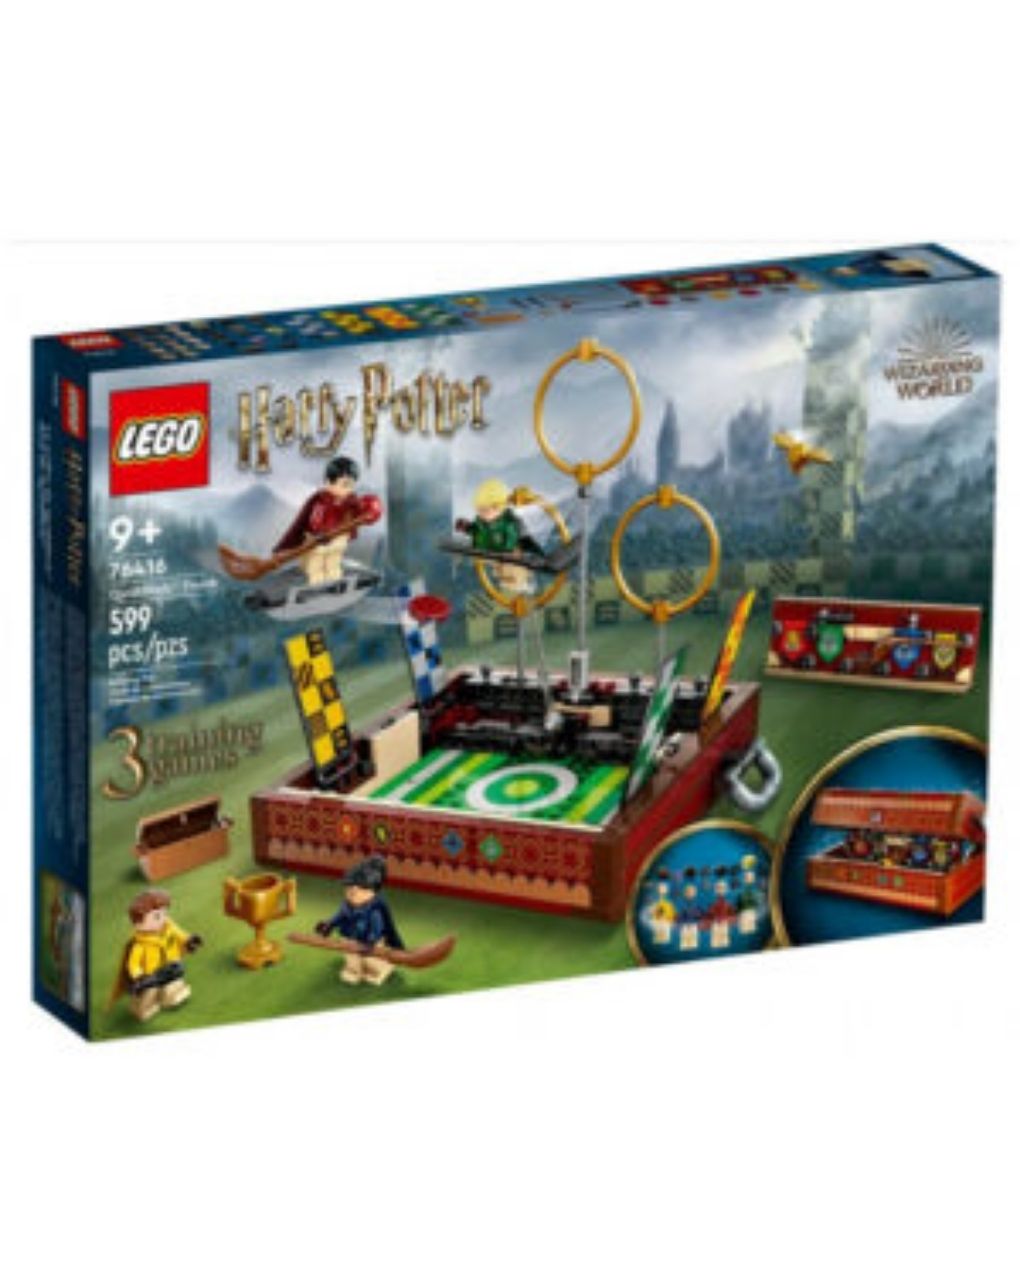 Lego quidditch™ trunk 76416 | harry potter